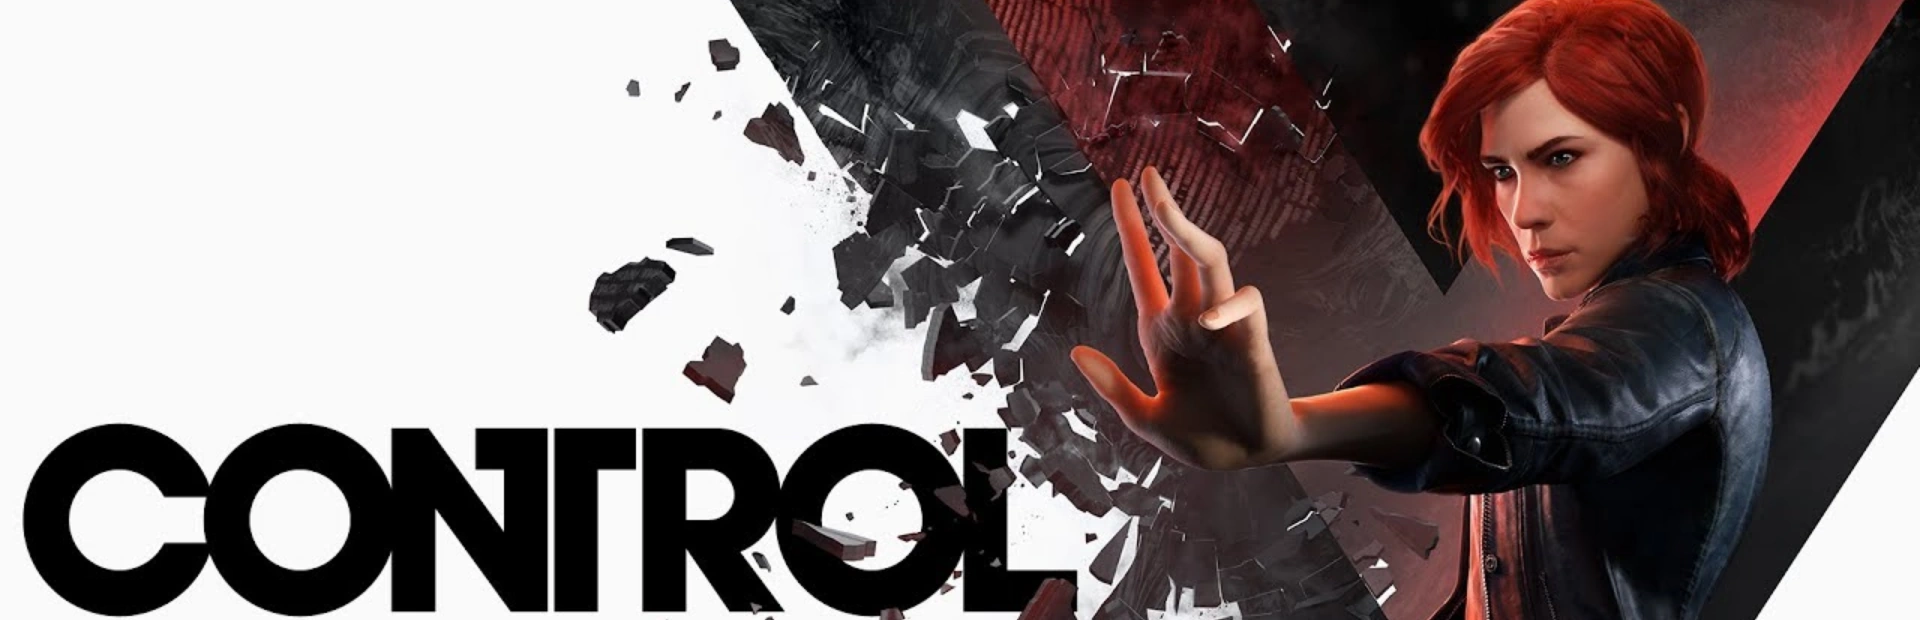 Control.Ultimate.Edition.banner2